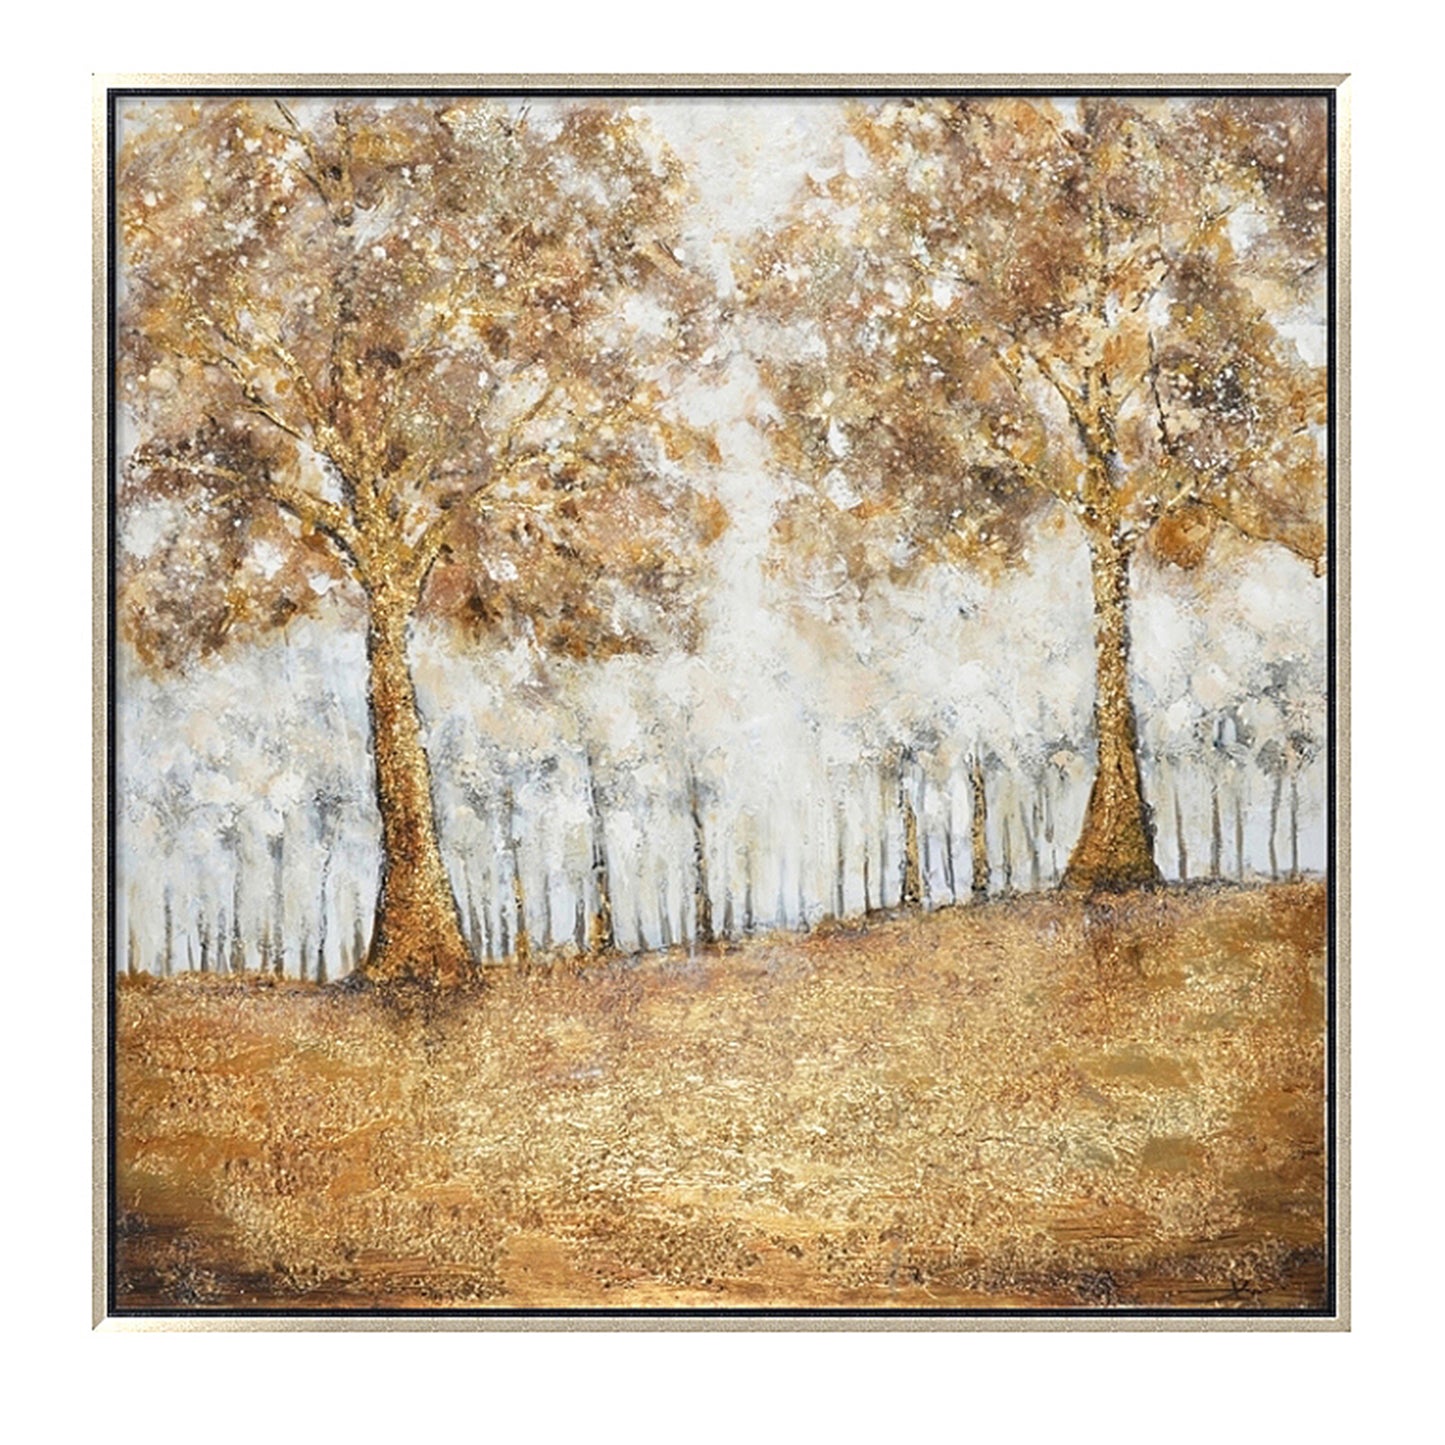 Hand Painted Acrylic Wall Art Golden Forrest on a 39 x 39 Square Canvas with a Champagne Wooden Frame